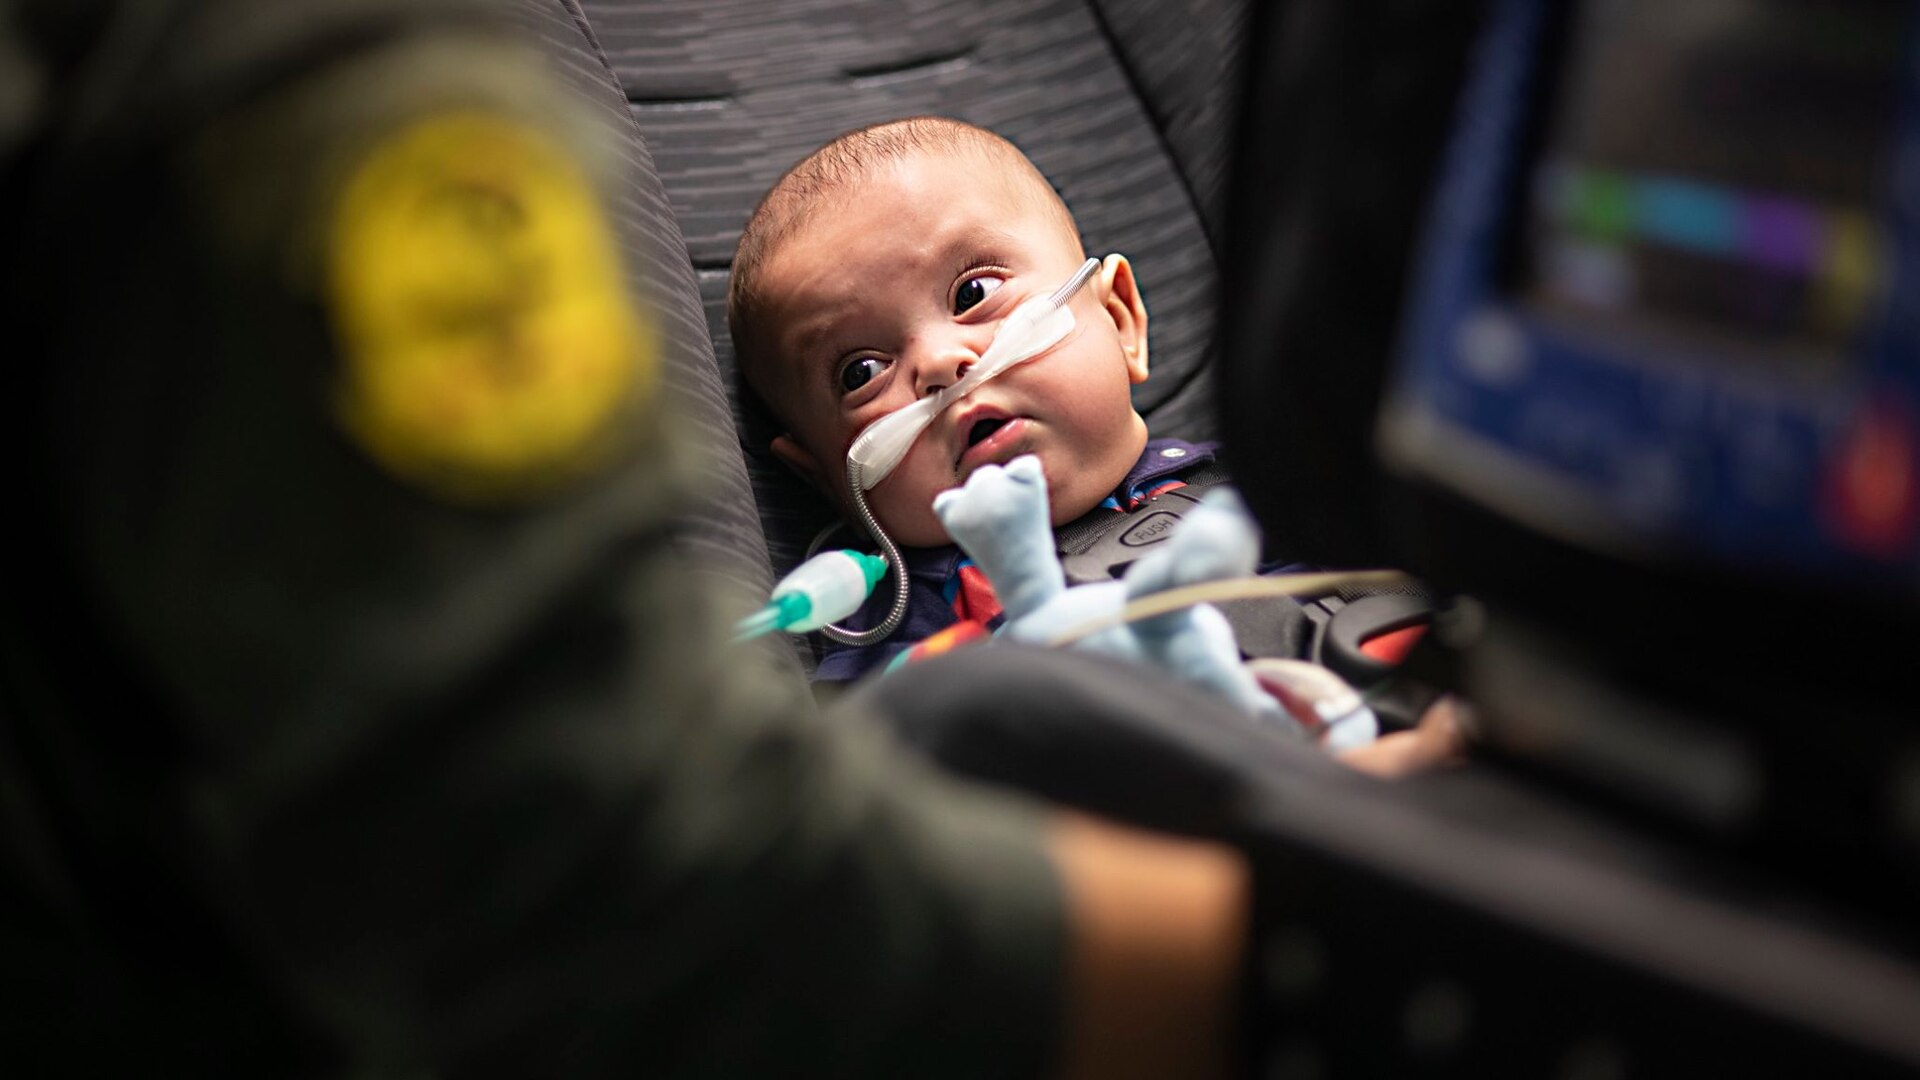 Nakoa Crawford, the 7-month-old son of U.S. Navy Petty Officer 2nd Class Daniel and Kaitlyn Crawford, looks up at Capt. Nicole Lieb, 59th Medical Wing critical care air transport nurse, as she prepares him to leave the hospital for the first time June 7, 2019 in Dallas. Nakoa was transported in a flying intensive care unit aboard a C-130 Hercules to a hospital closer to where his father is stationed in San Diego.